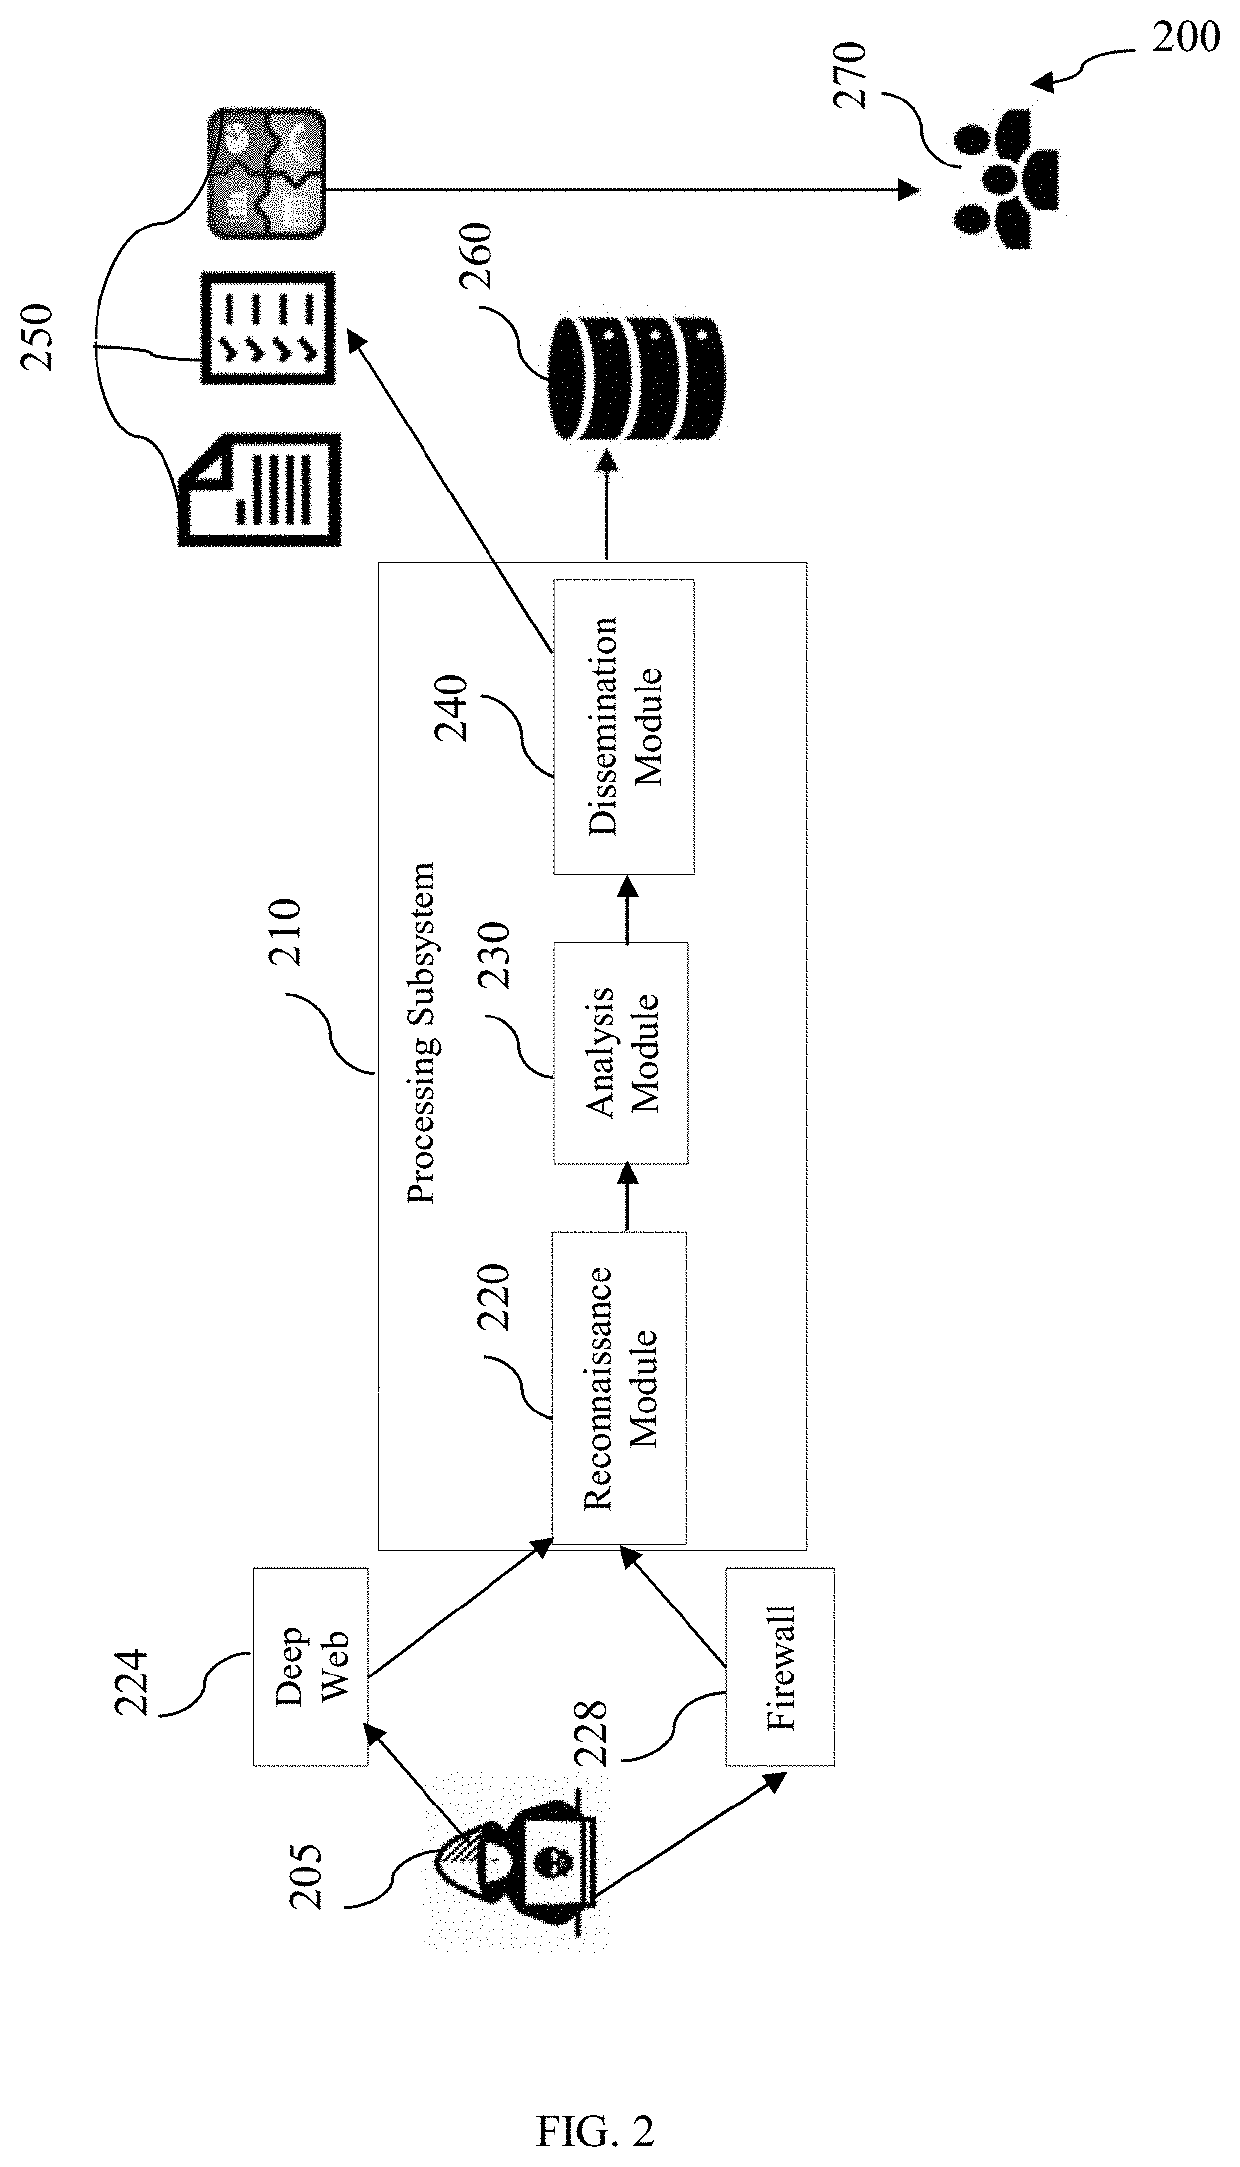 System and method for data analysis and detection of threat